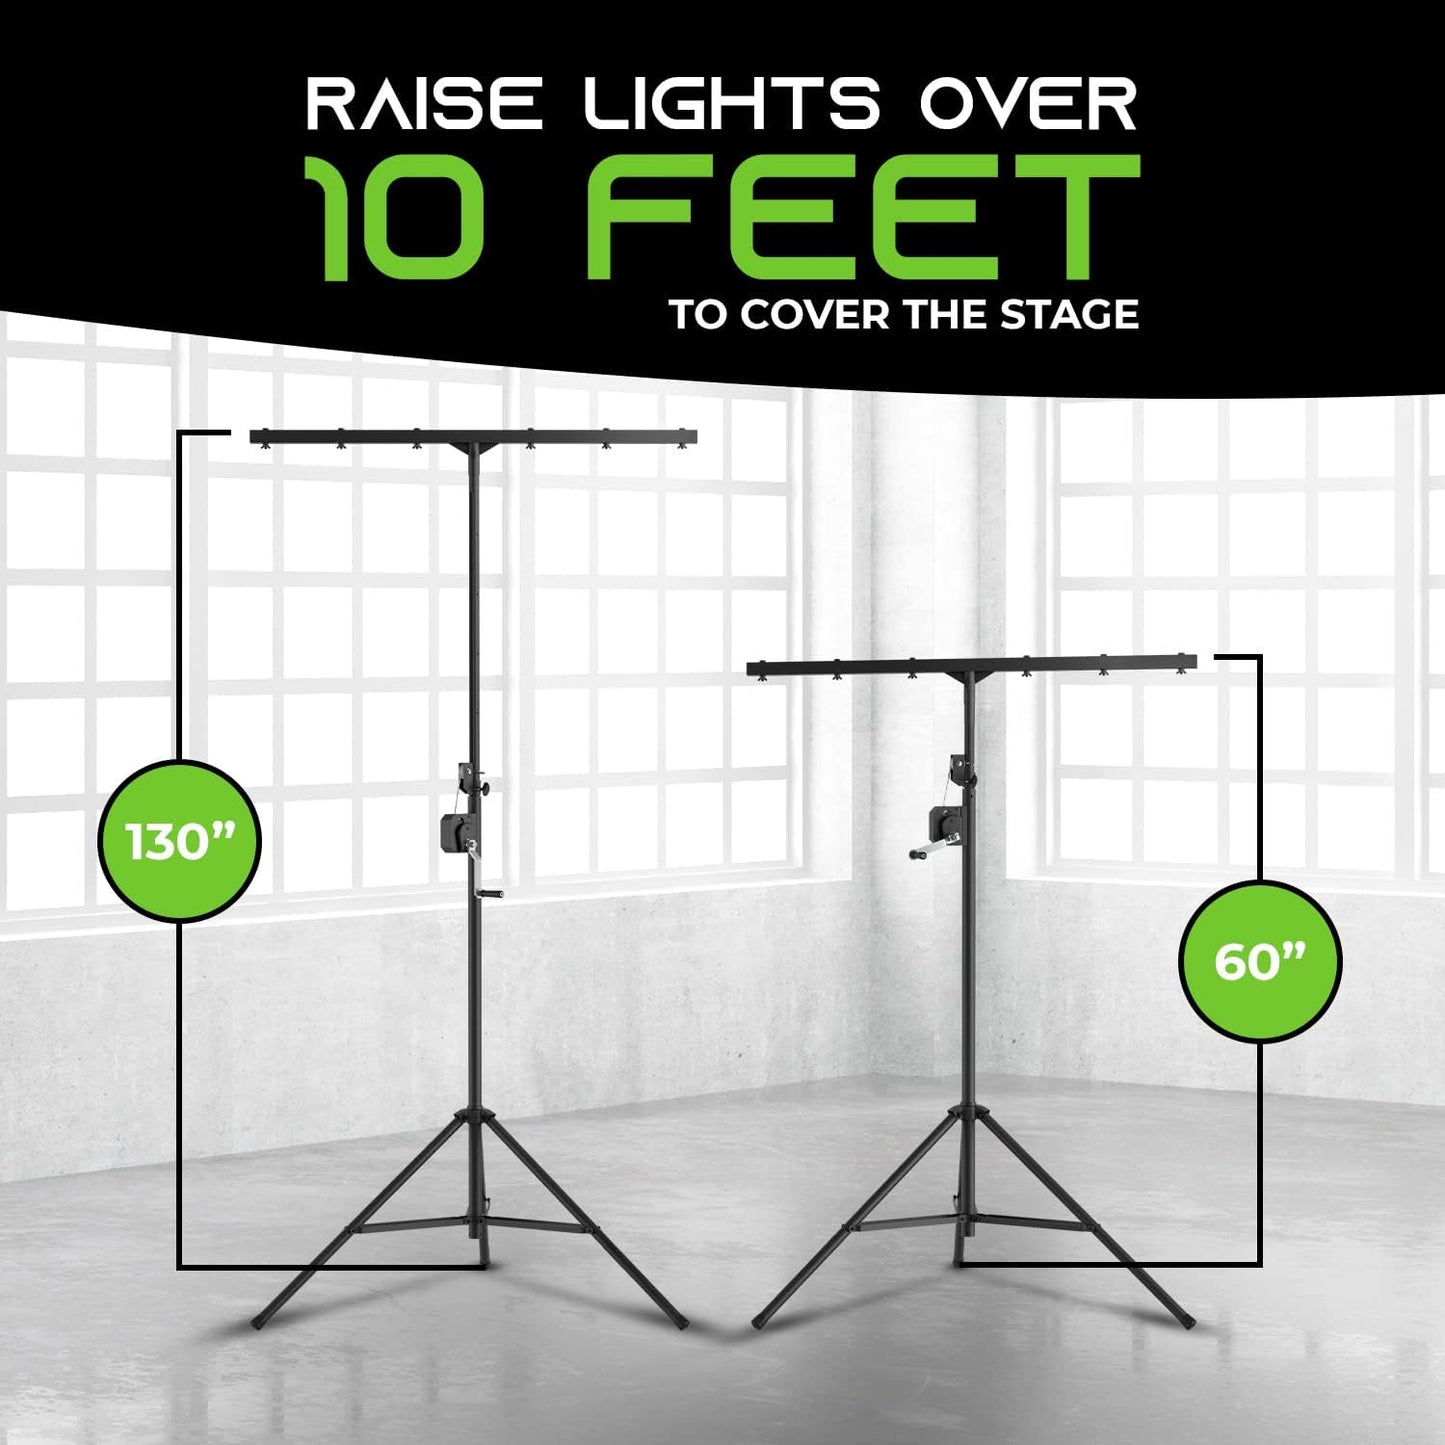 GearIT LED Light Stand With 5 Ft. T-Bar for 6 PAR Lights, Hand Crank, Heavy-Duty Tripod With Metal Joint, Pro-Grade Portable Design for DJ Lighting, Bands, Venues and Stages